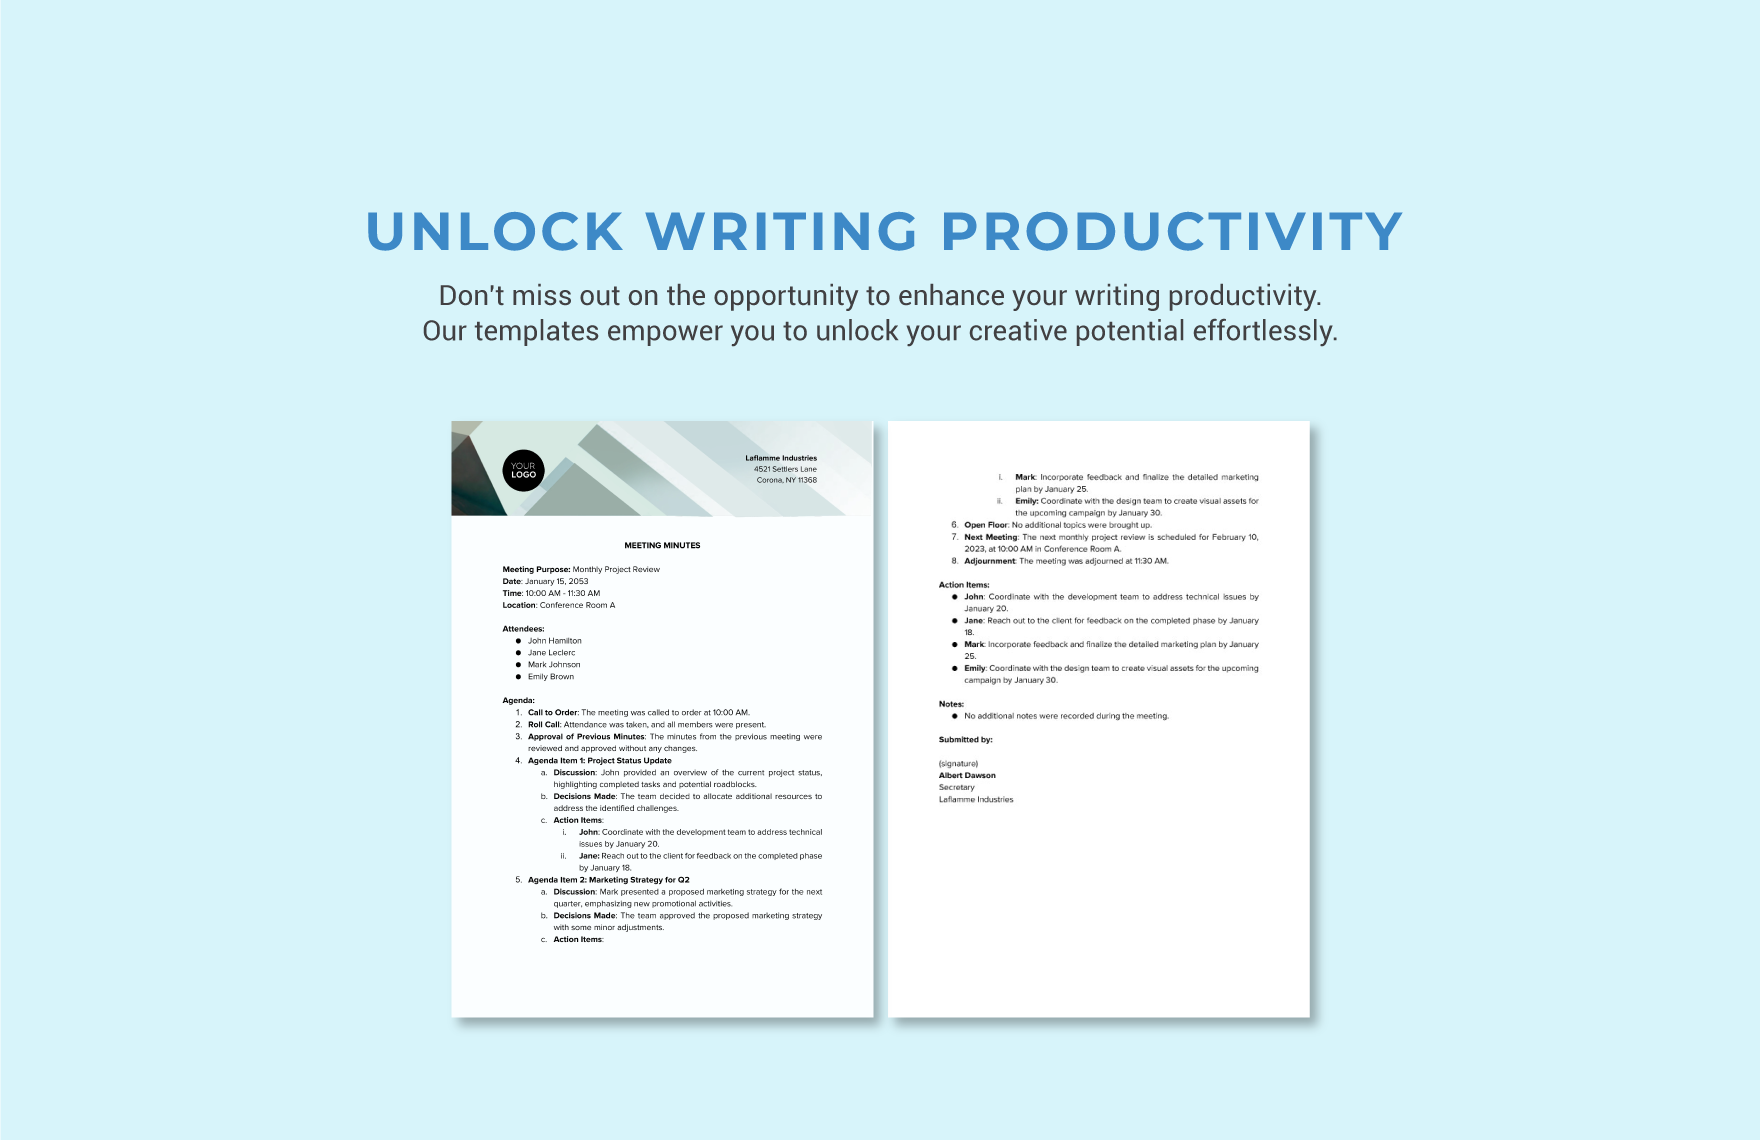 Minutes Writing Template